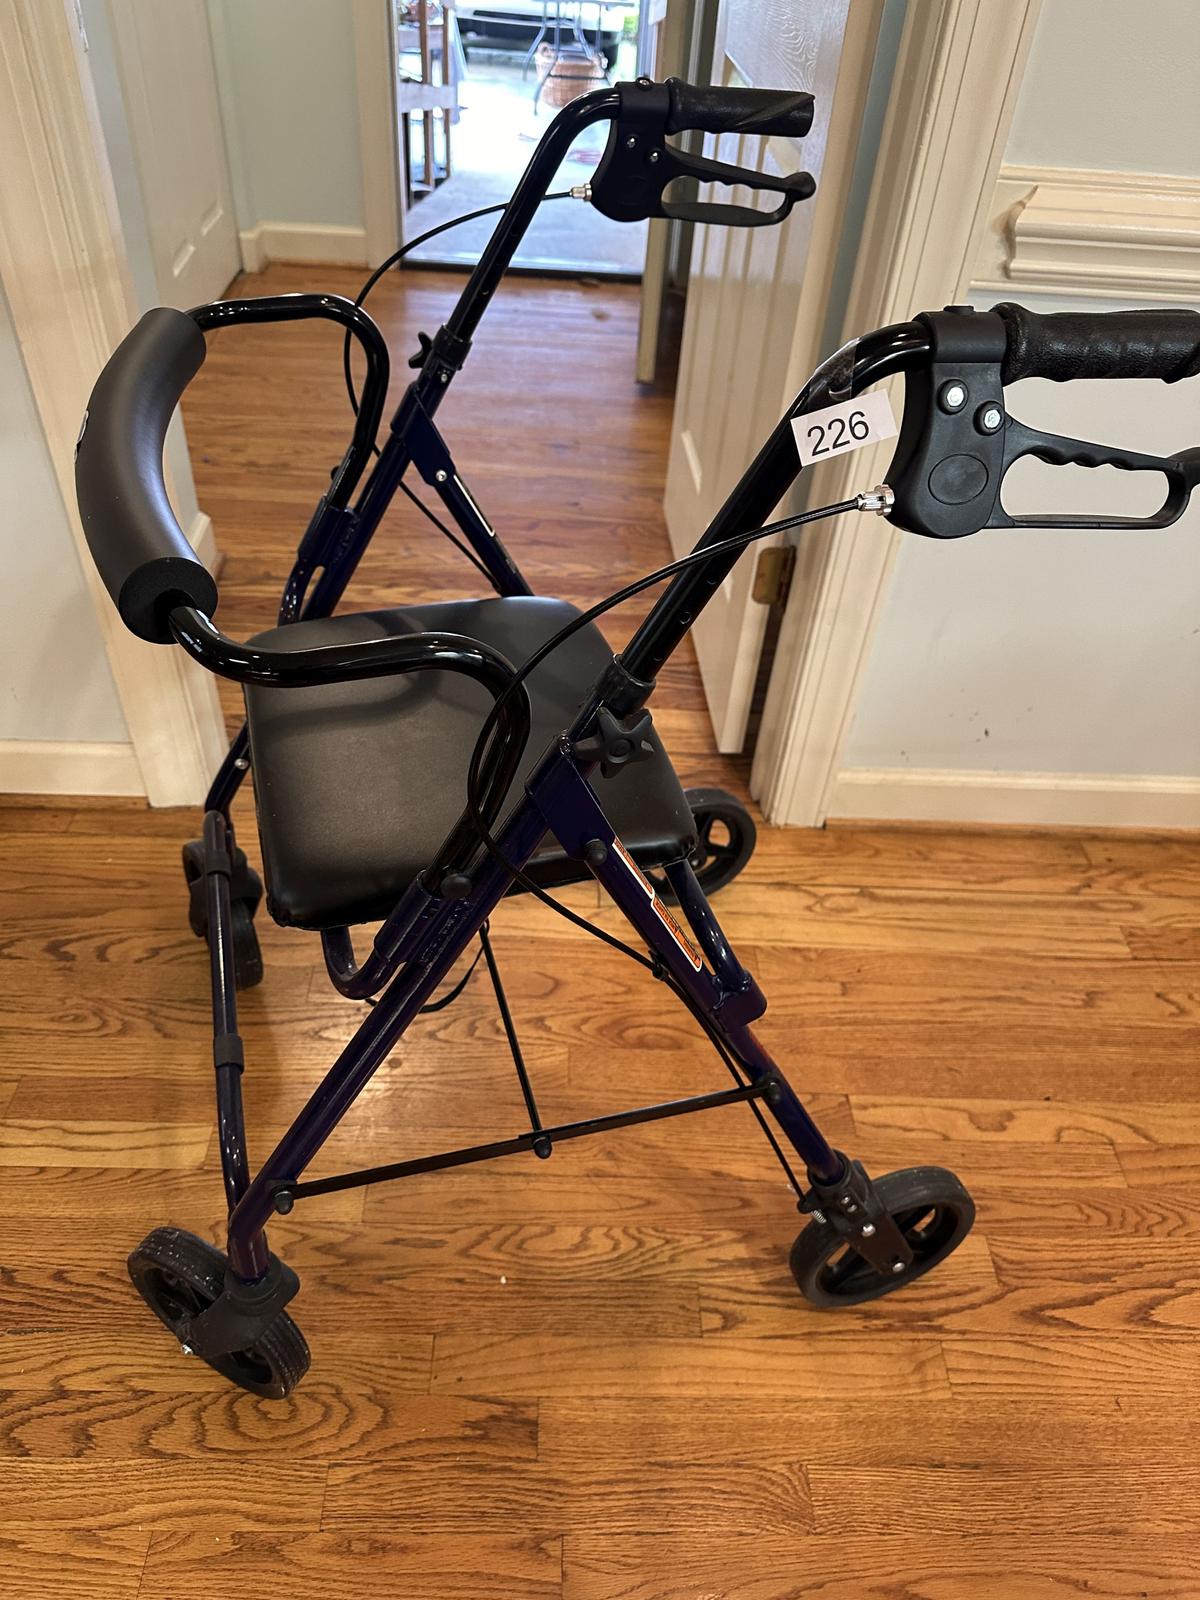 INVACARE Walker (Local Pick Up Only)